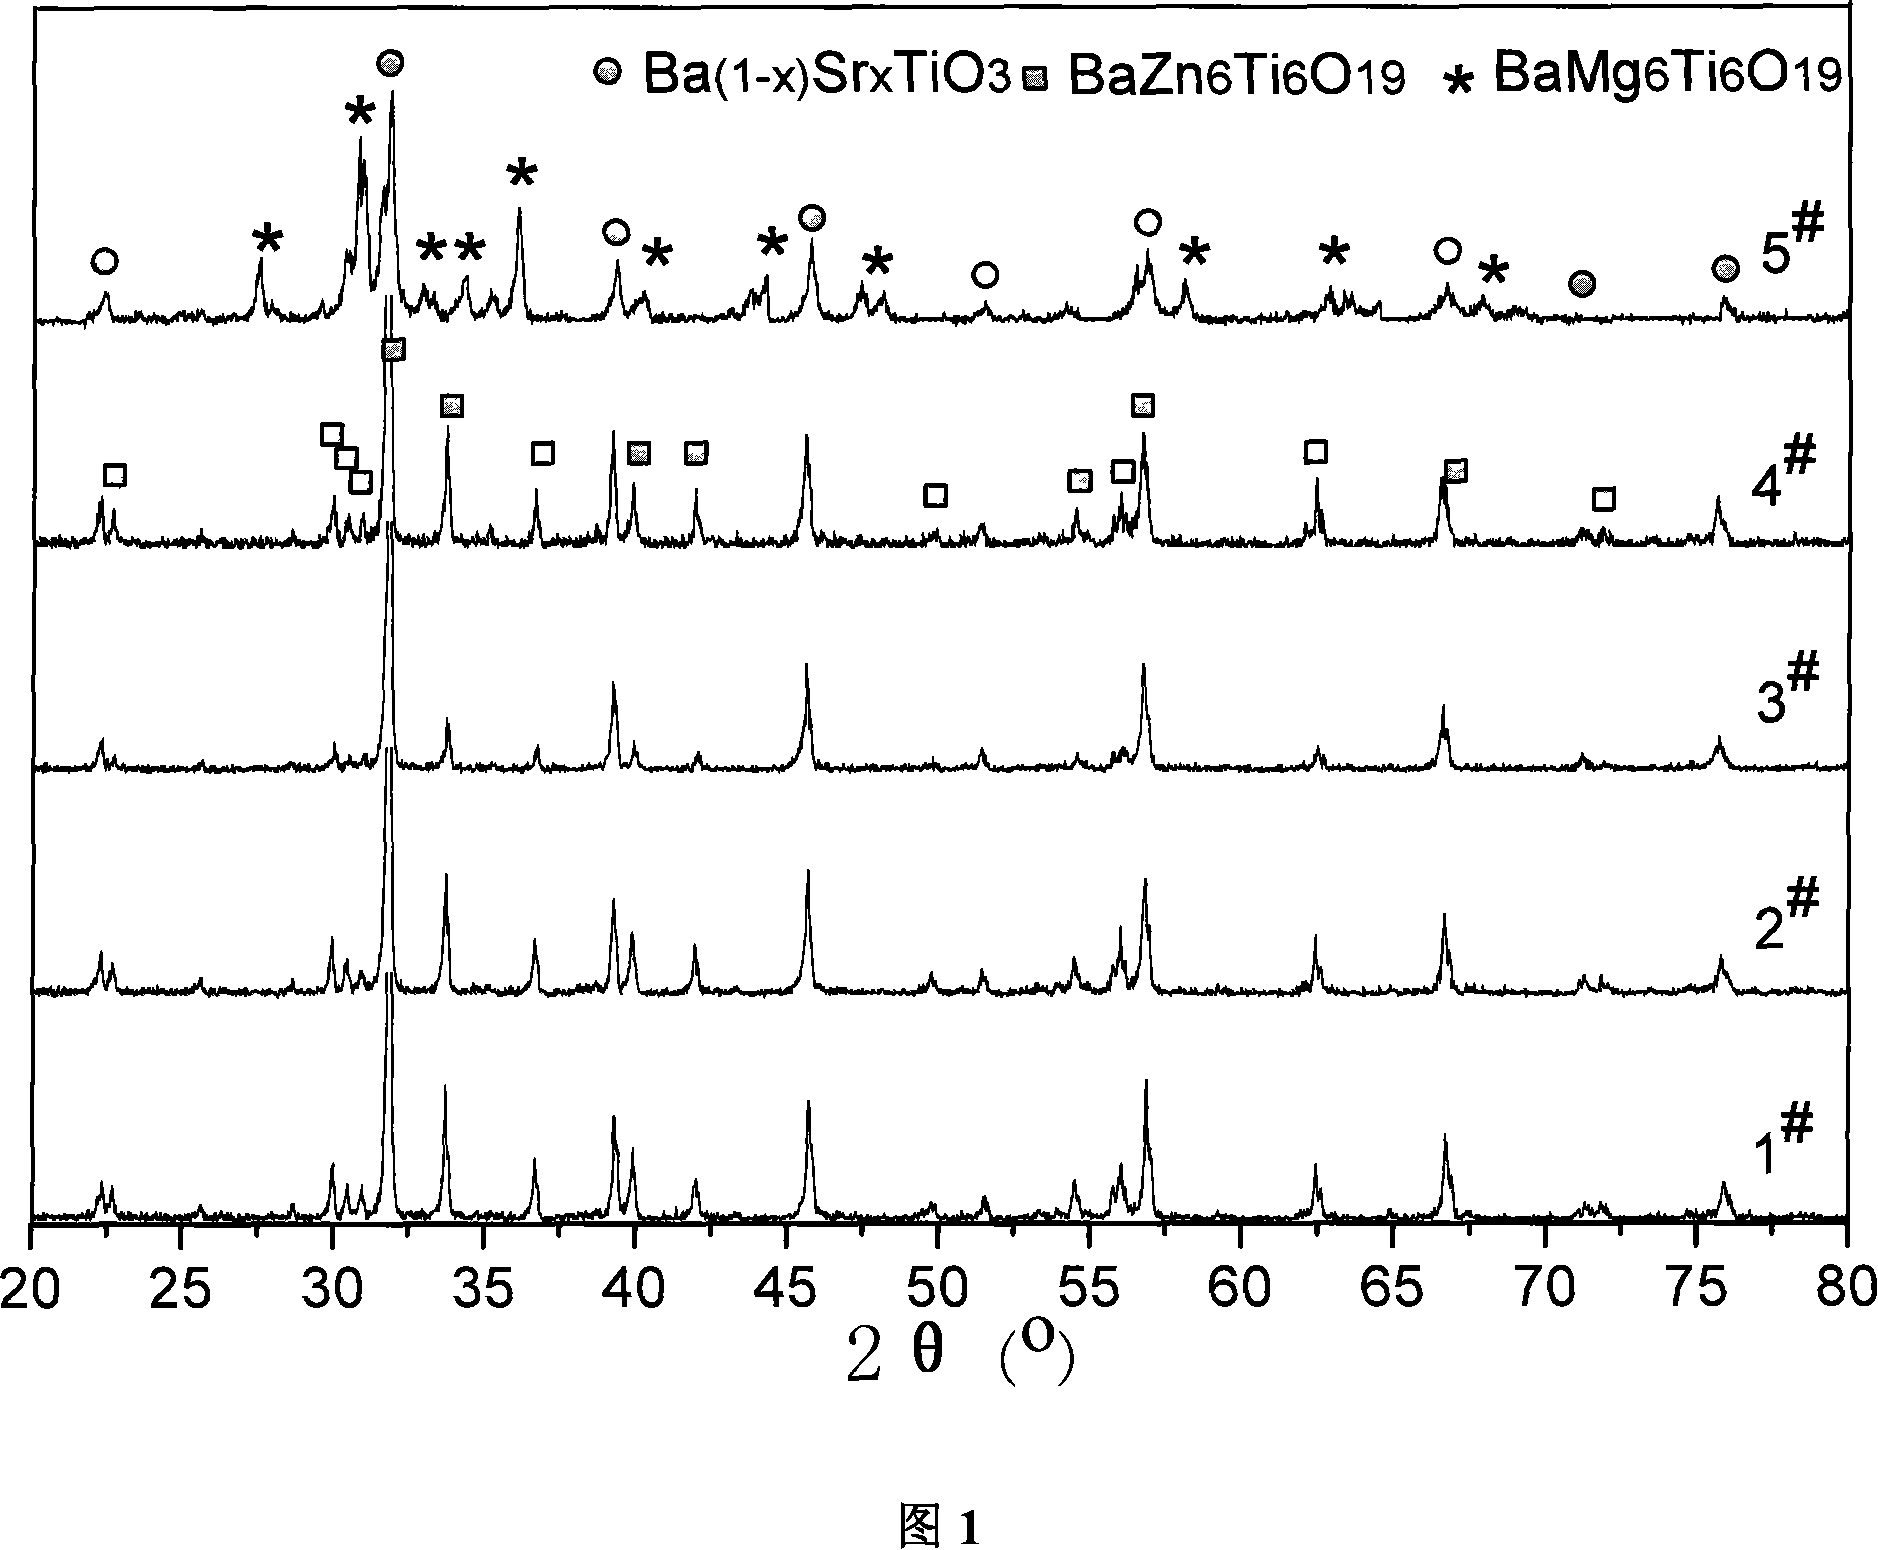 Ba(1-x)SrxTiO3-BaX6Ti6O19(X=Mg, Zn) diphasic composite micro-wave ceramic material and preparation method thereof